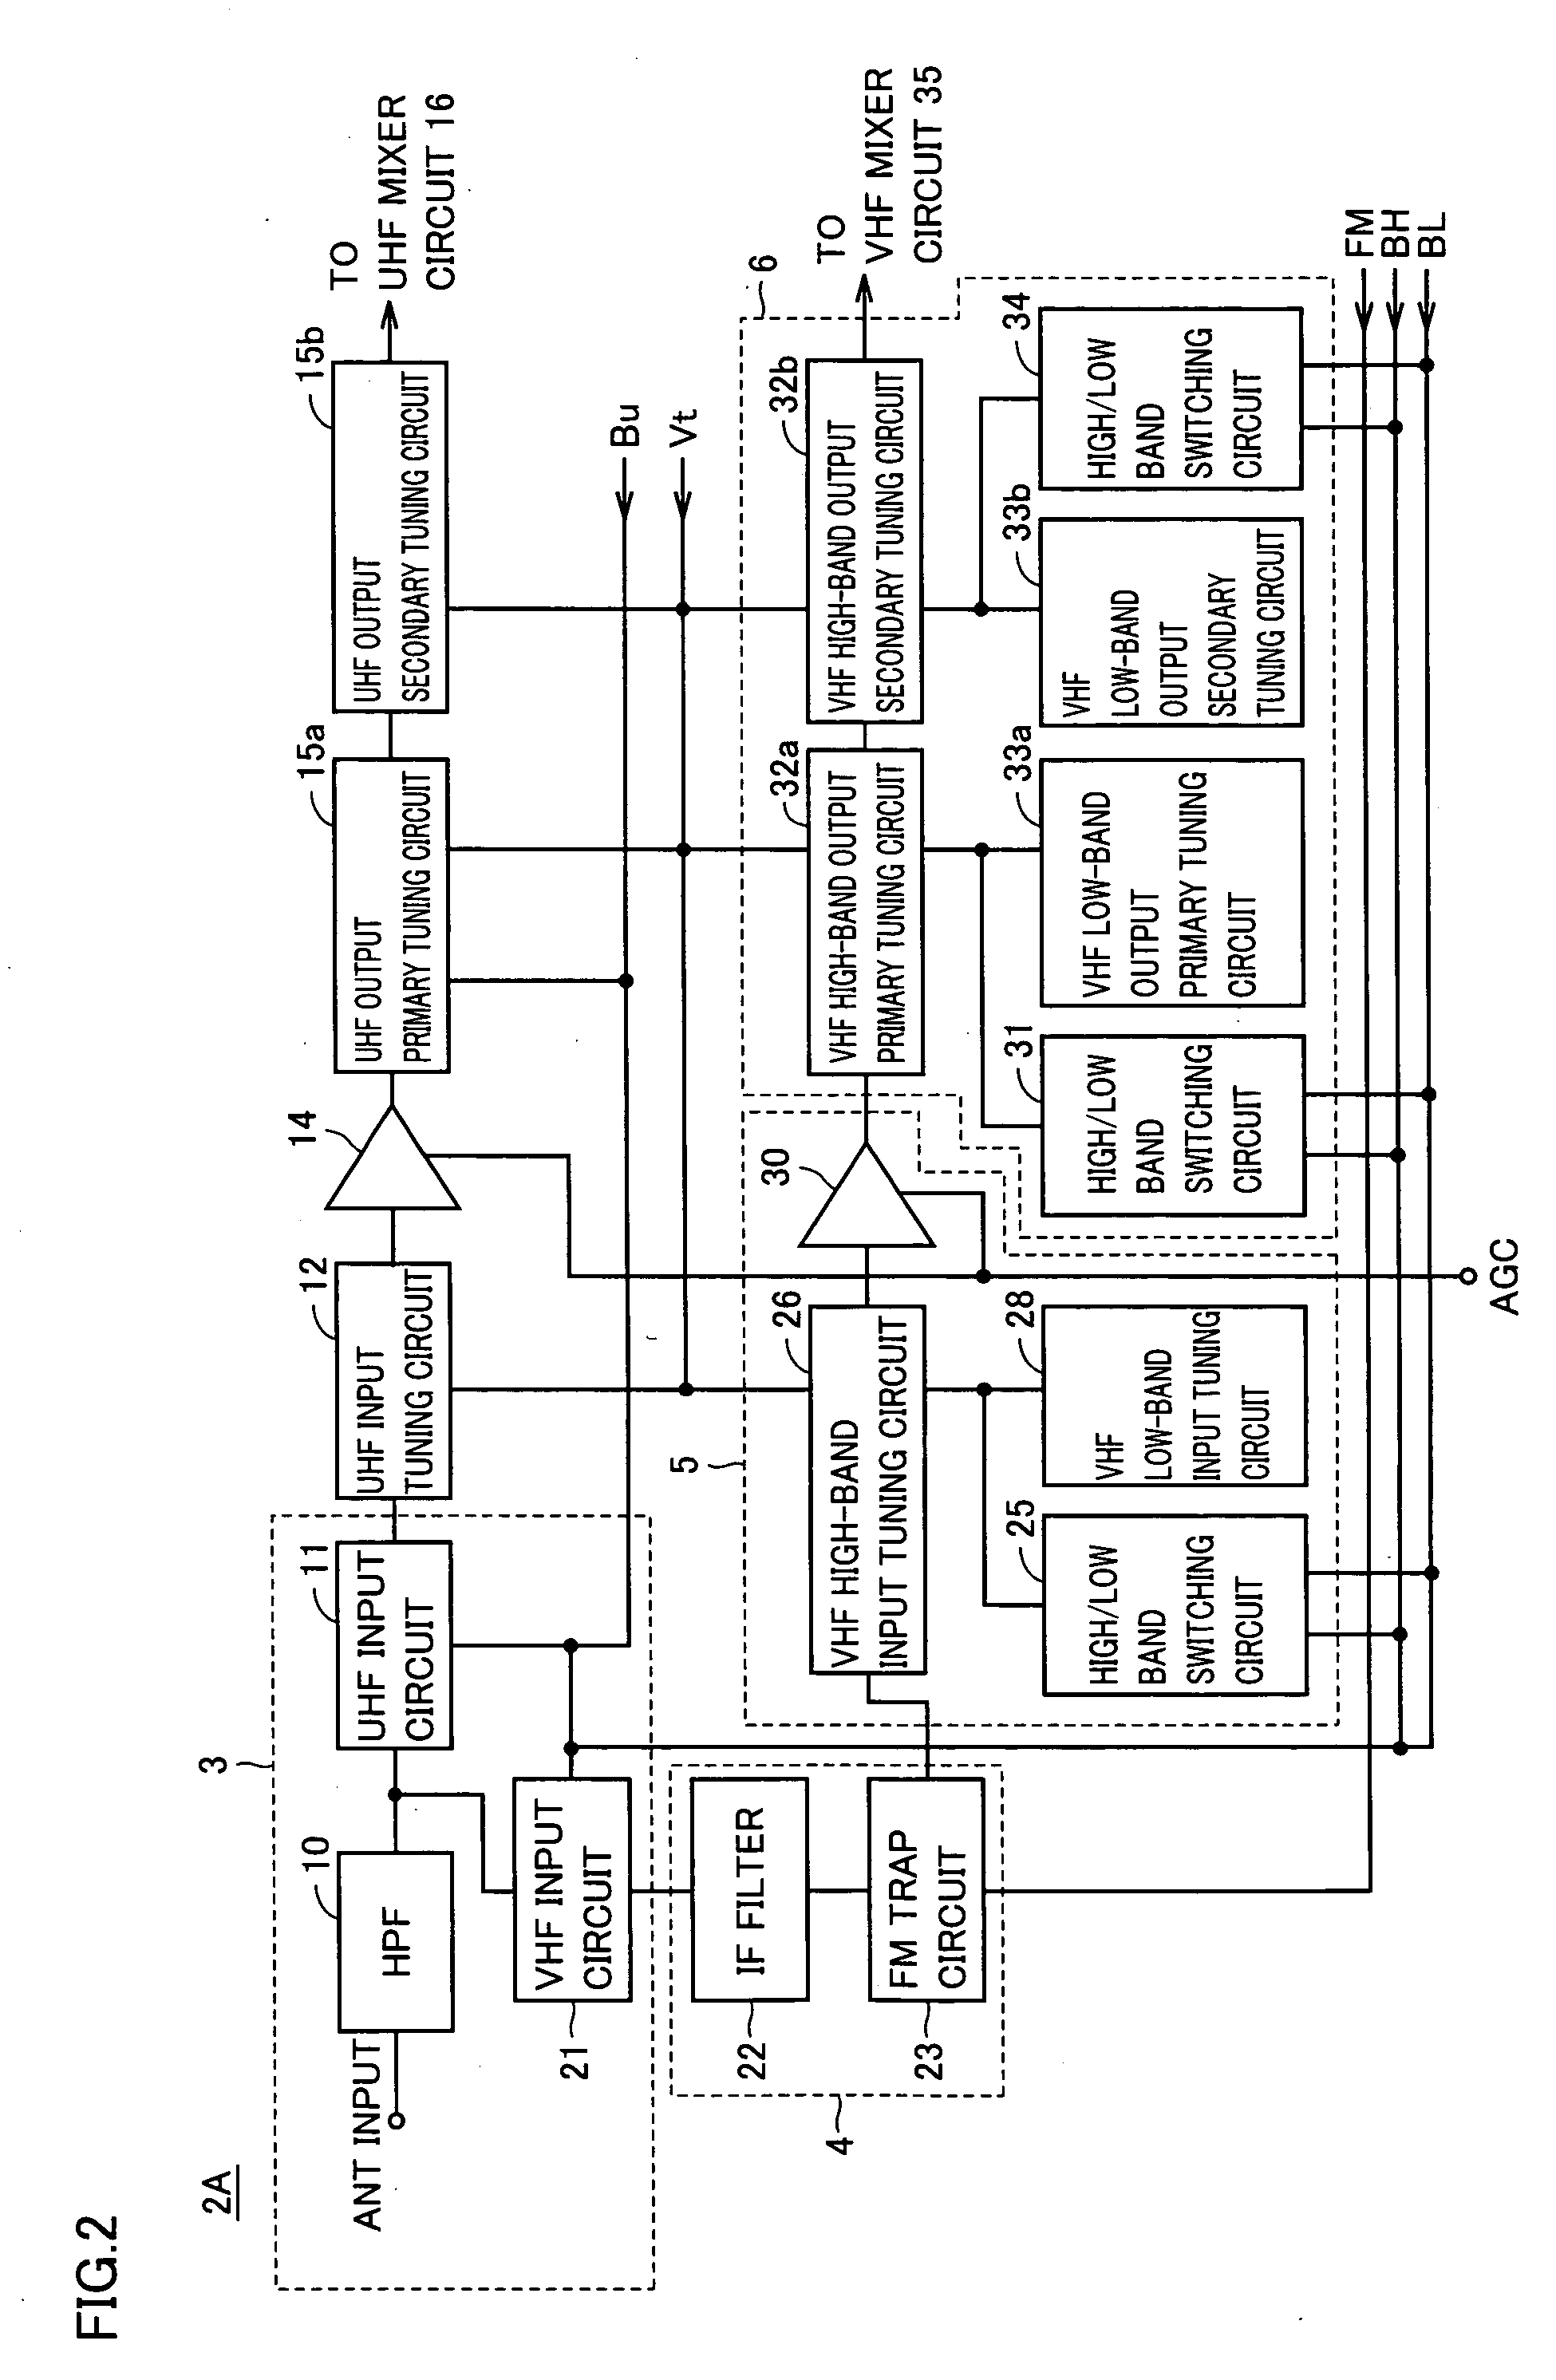 Receiver device having improved selectivity characteristics